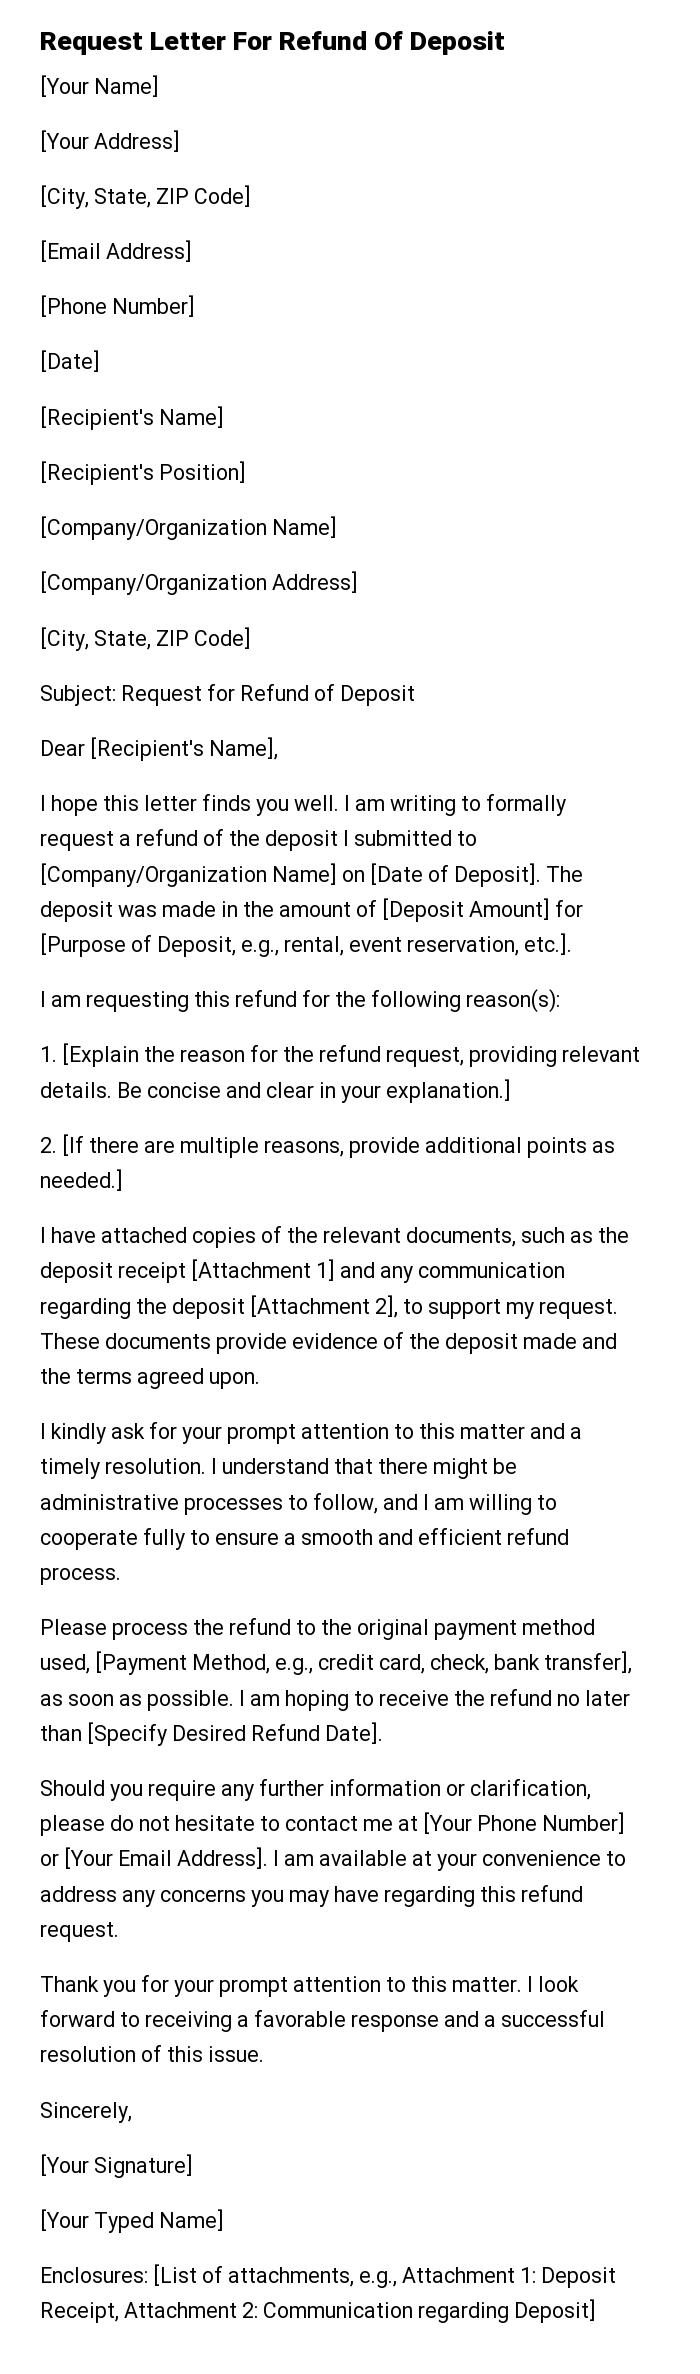 Request Letter For Refund Of Deposit